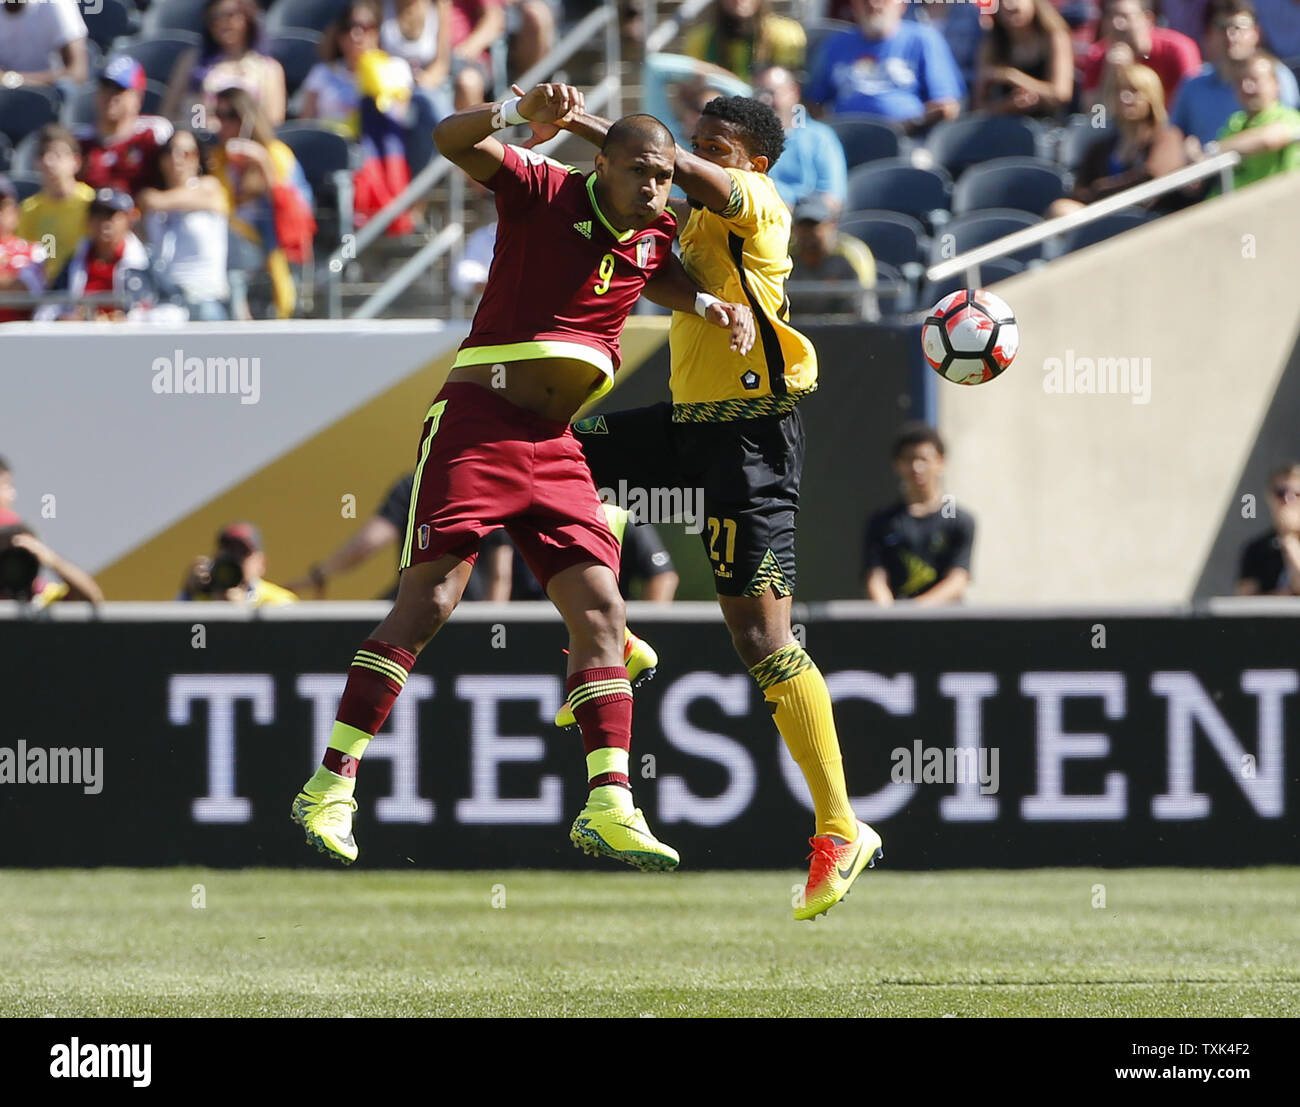 Succesvol Ontvangst cent Venezuela forward Jose Salomon Rondon (L) and Jamaica defender Jermaine  Taylor (21) go for the ball during the first half of a 2016 Copa America  Centenario match at Soldier Field in Chicago